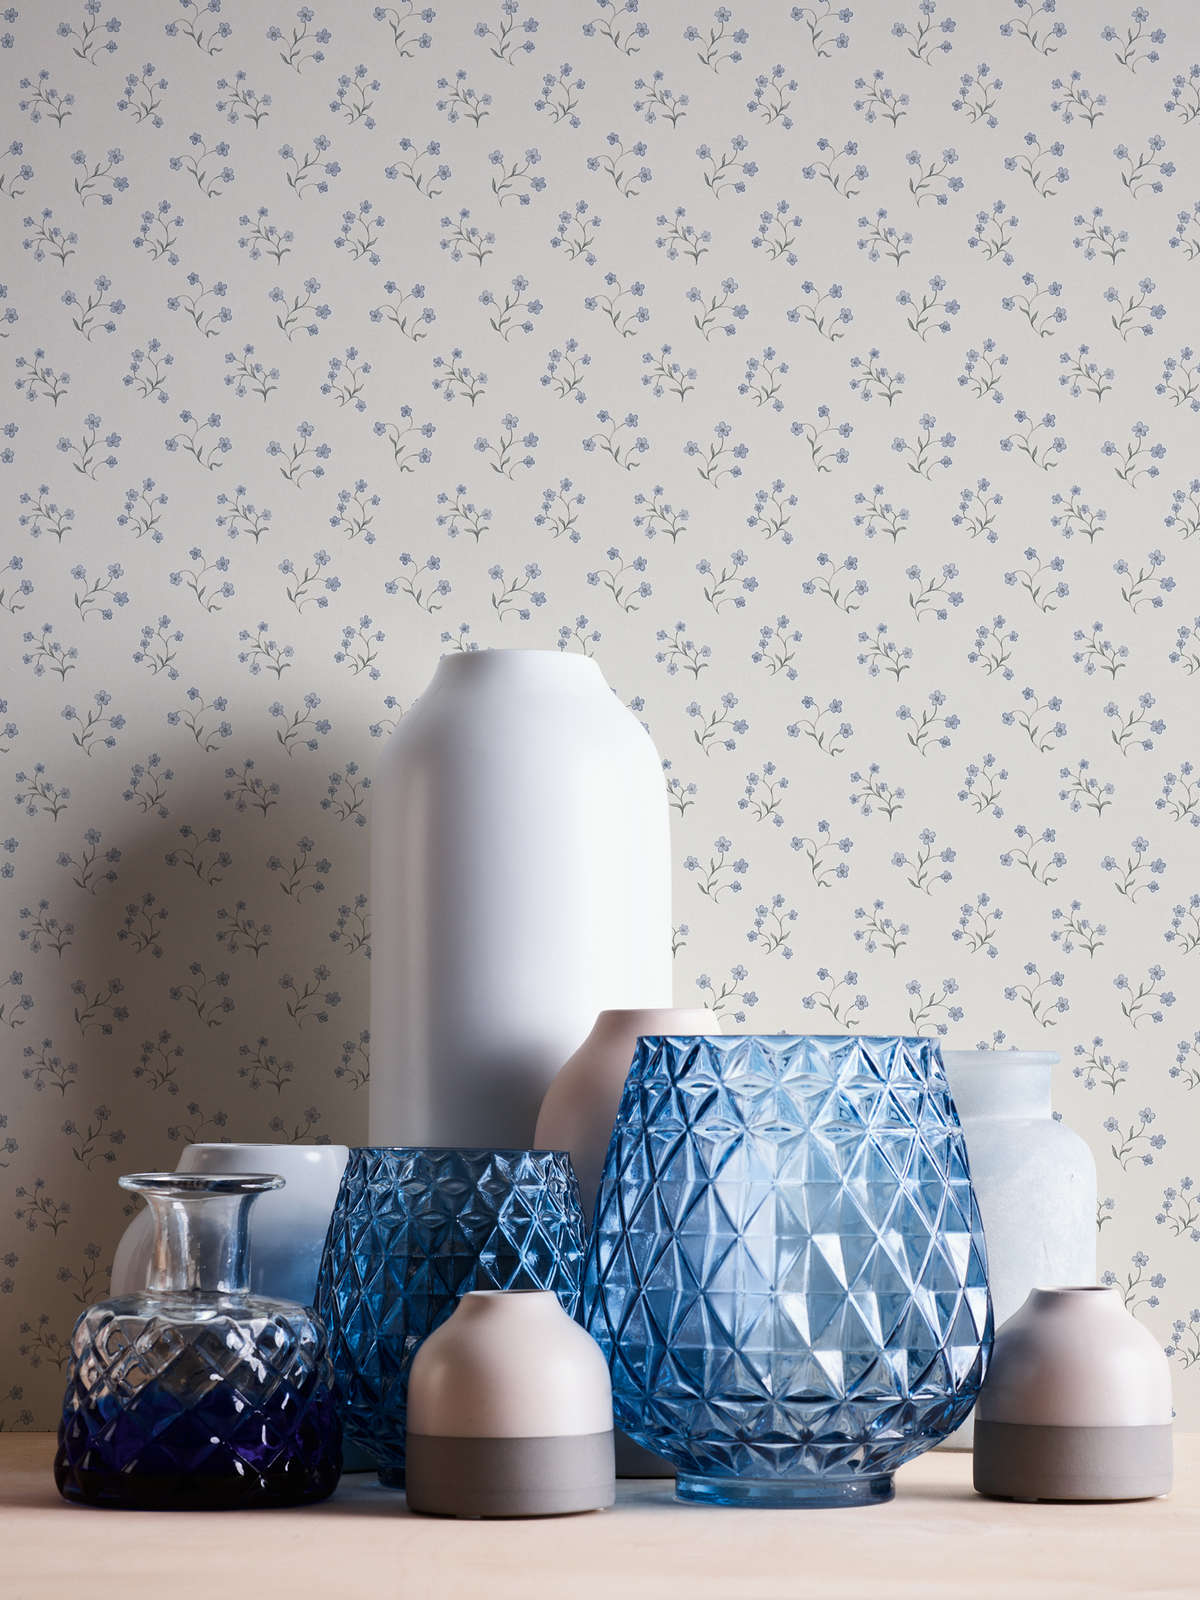             Non-woven wallpaper with fine floral pattern - white, blue, grey
        